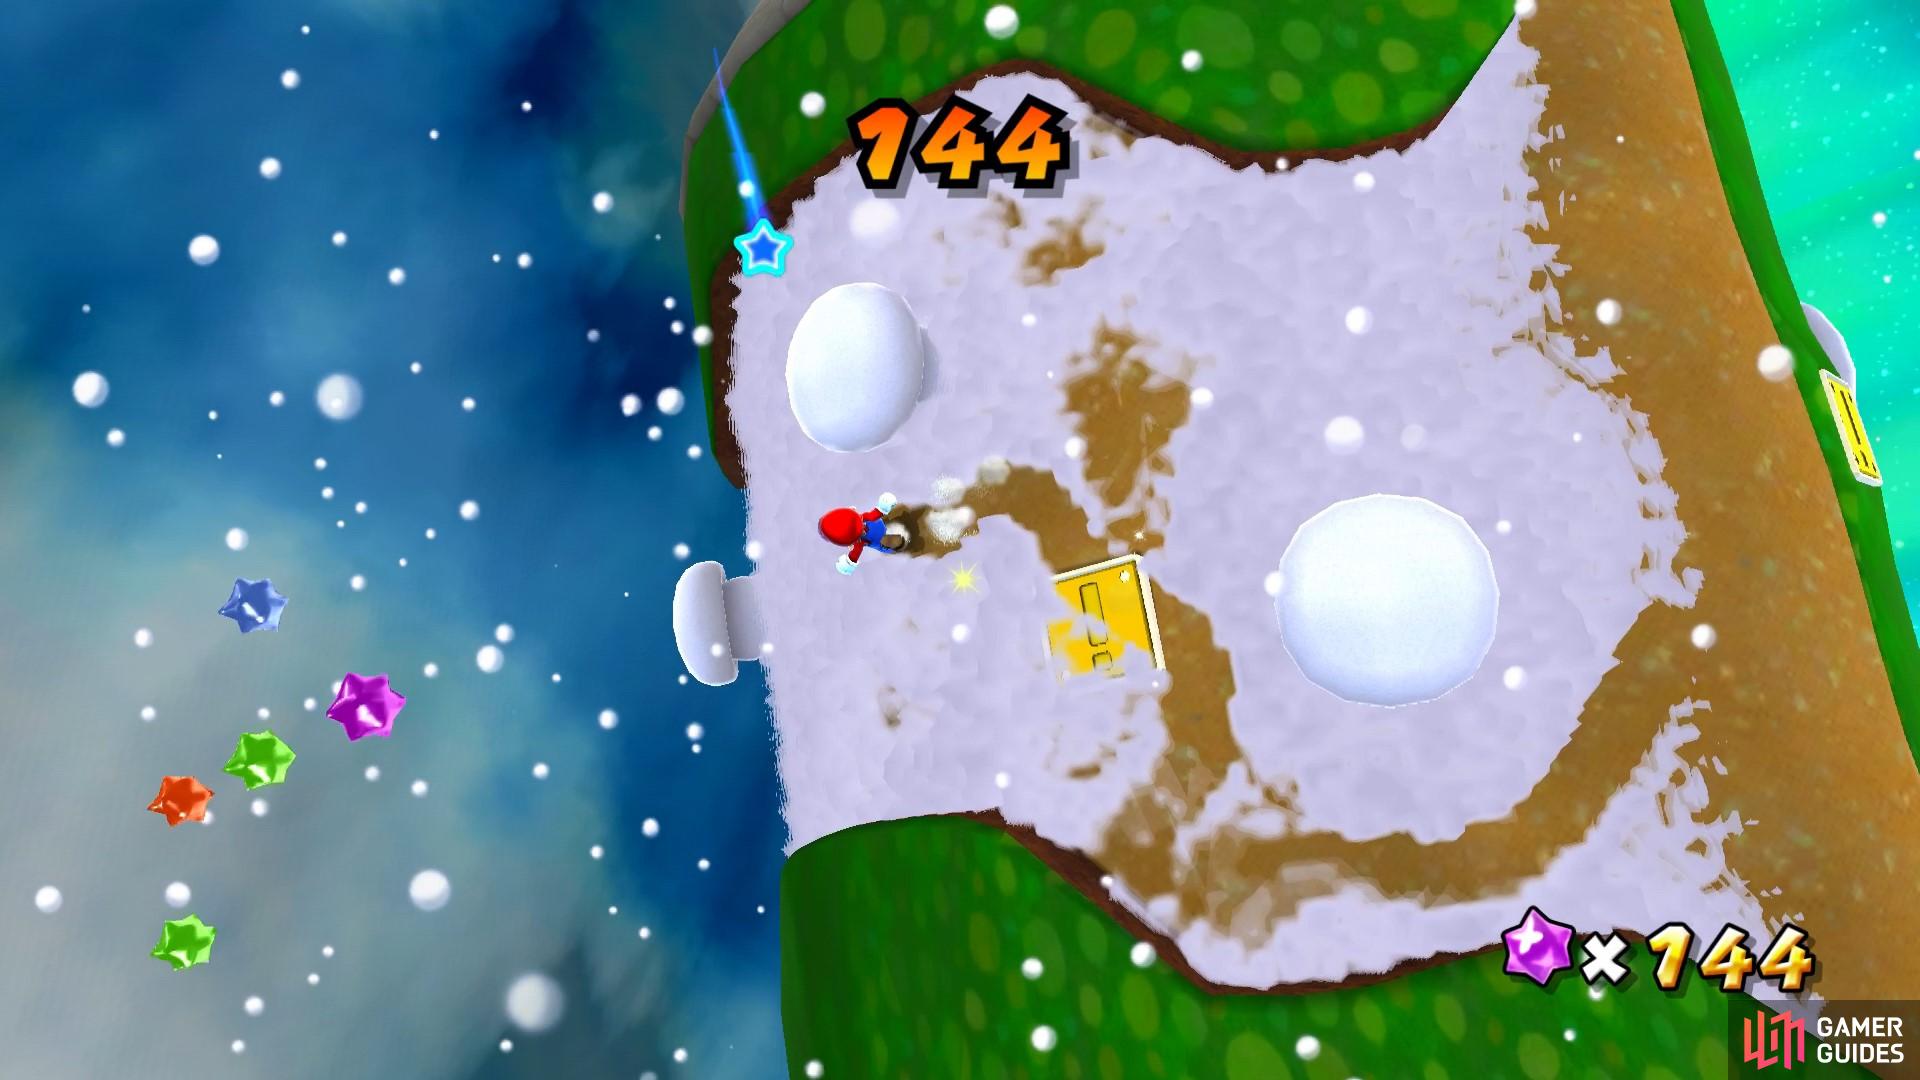 You’ll need to use your star cursor to get rid of the snow.